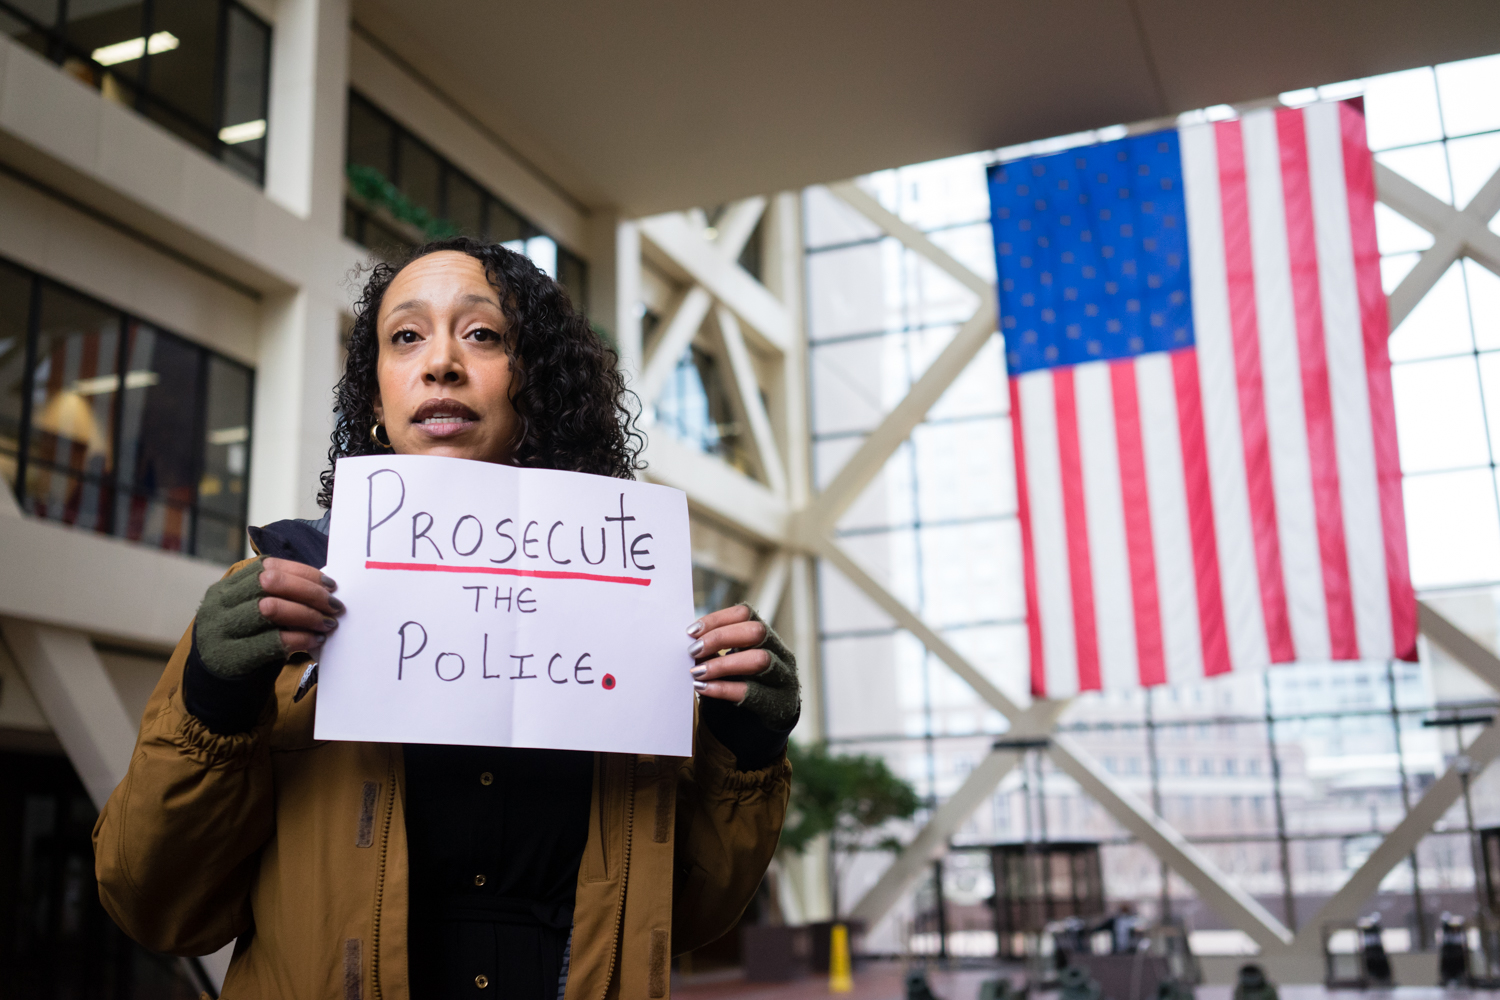 Twin Cities Daily Planet: Could a police-free city be a viable option in Minneapolis?